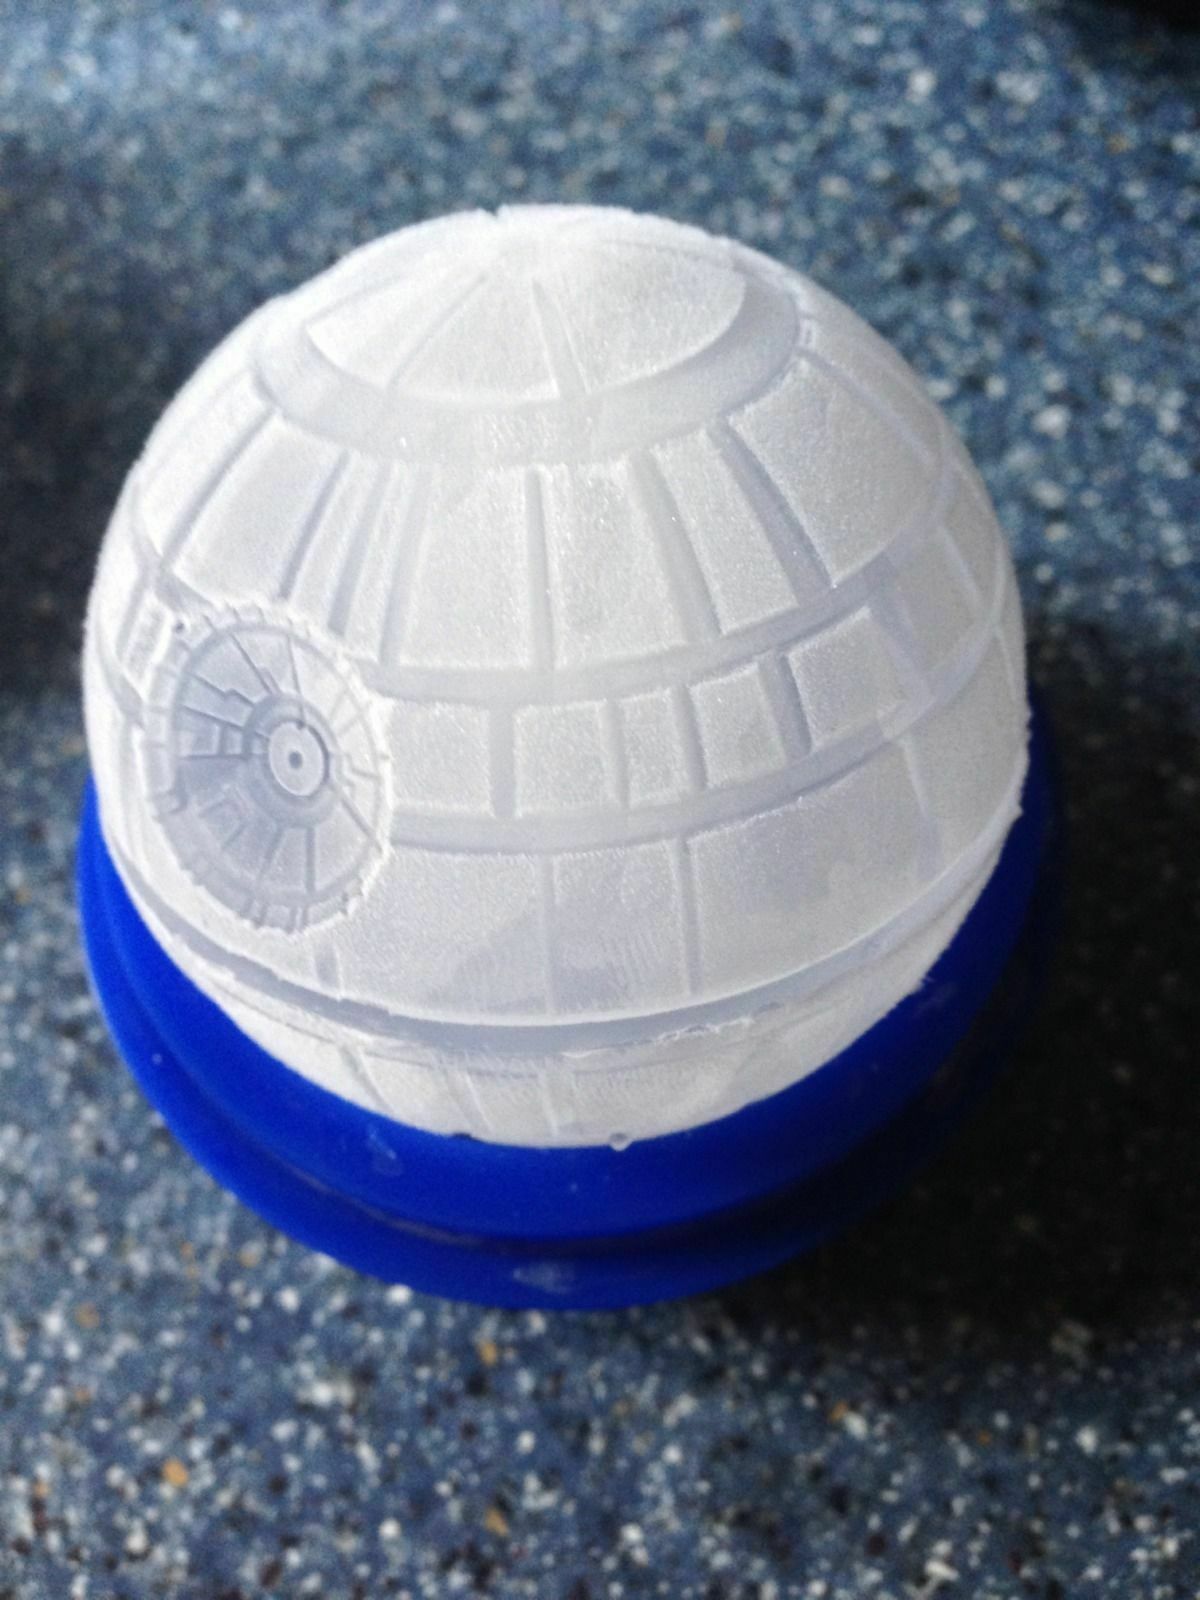 Star Wars Episode Iv Death Star Silicone Mold Ice Cube Chocolate